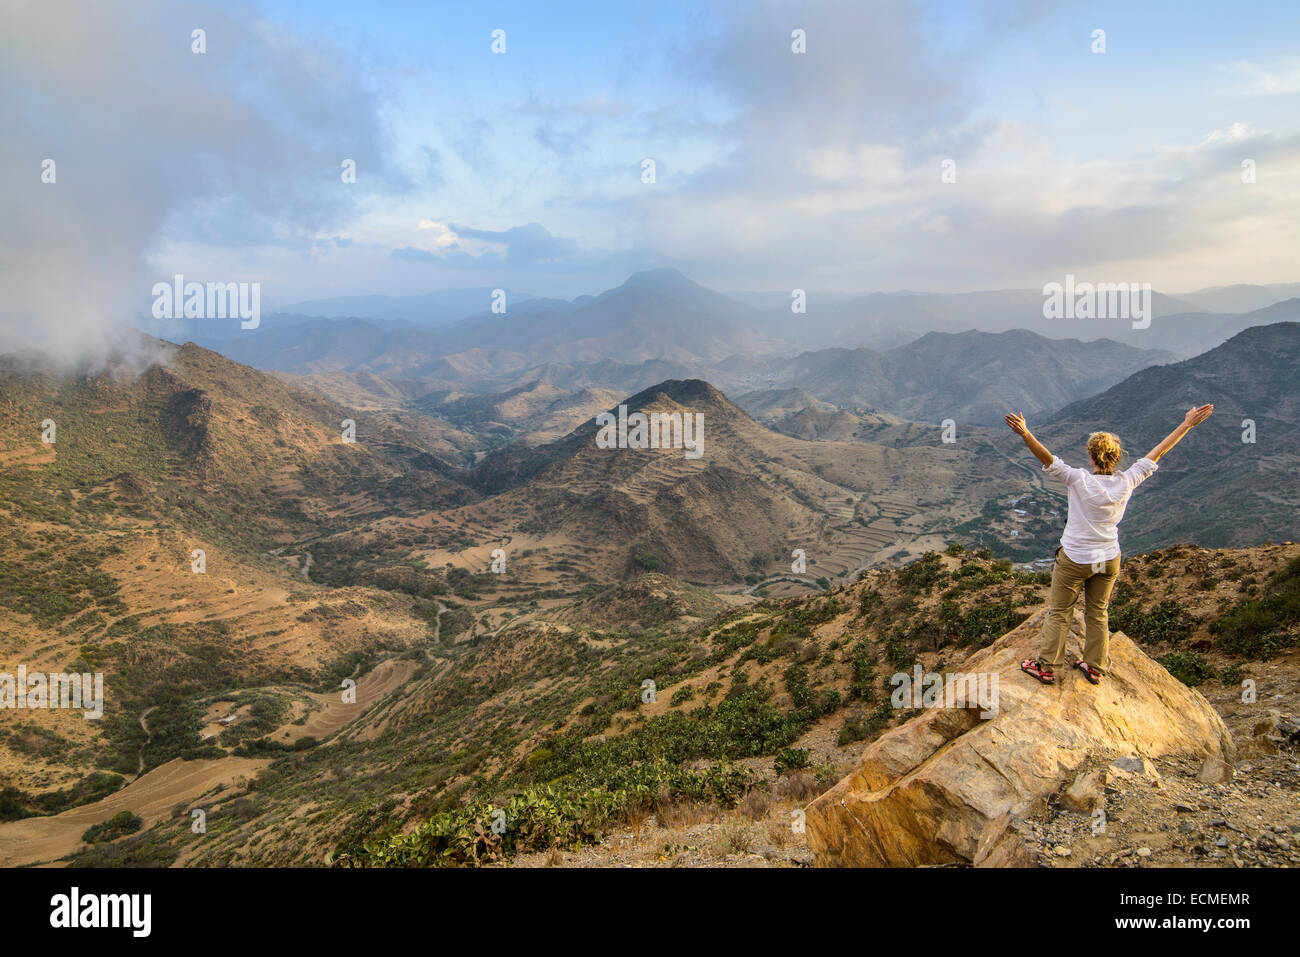 Woman enjoying the view over the mountains along the road from Massawa to Asmarra, Eritrea Stock Photo